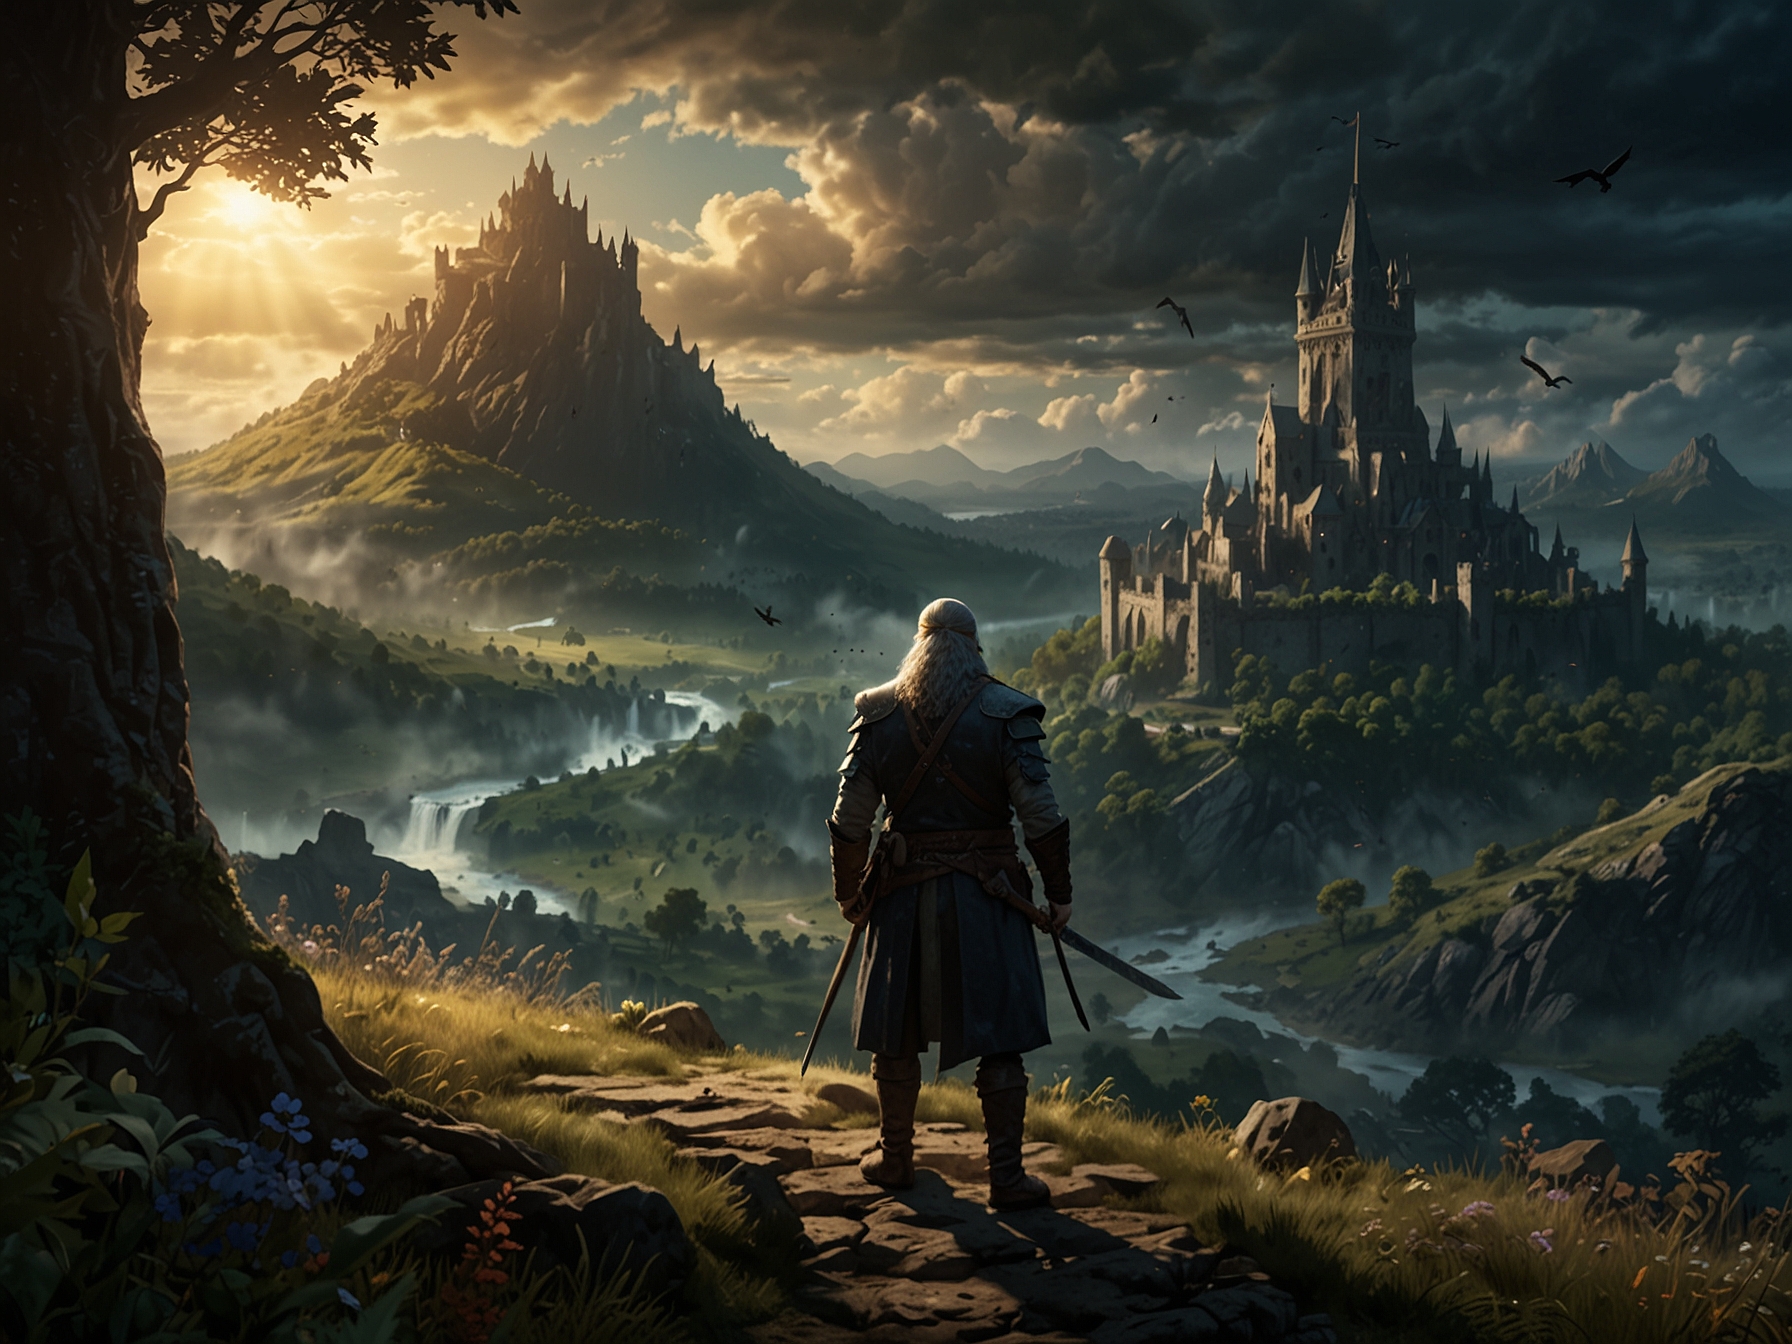 A vibrant scene from the game 'Elden Ring' showcasing its expansive, dark fantasy world crafted by Hidetaka Miyazaki and George R.R. Martin, representing the highlight of the 2024 Steam Summer Sale.